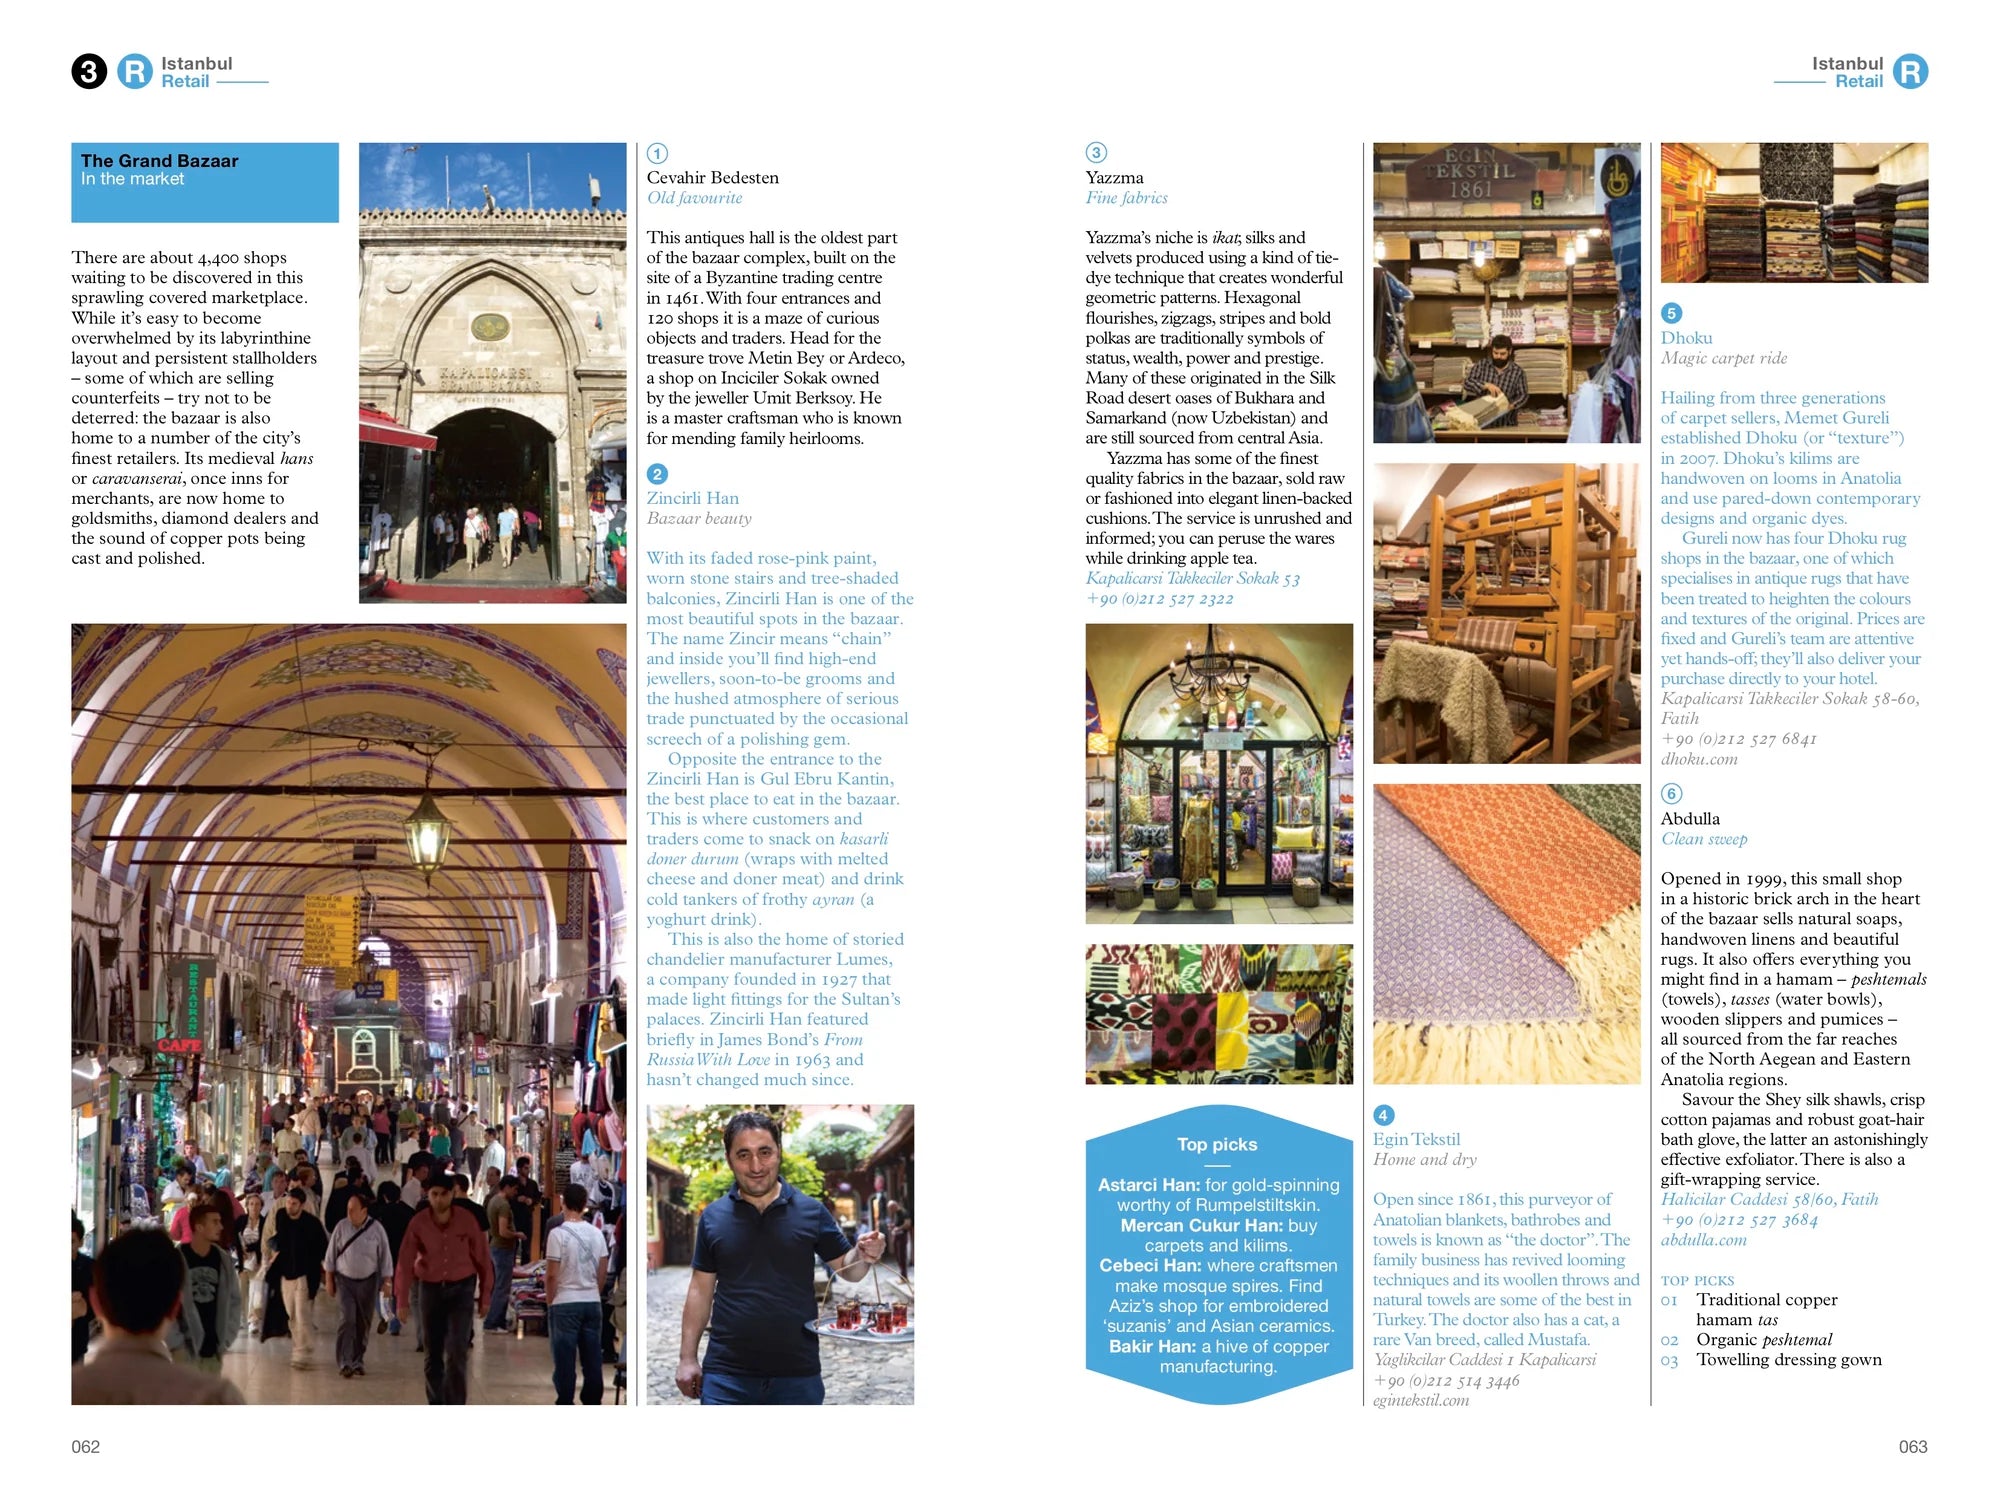 ISTANBUL: THE MONOCLE TRAVEL GUIDE SERIES